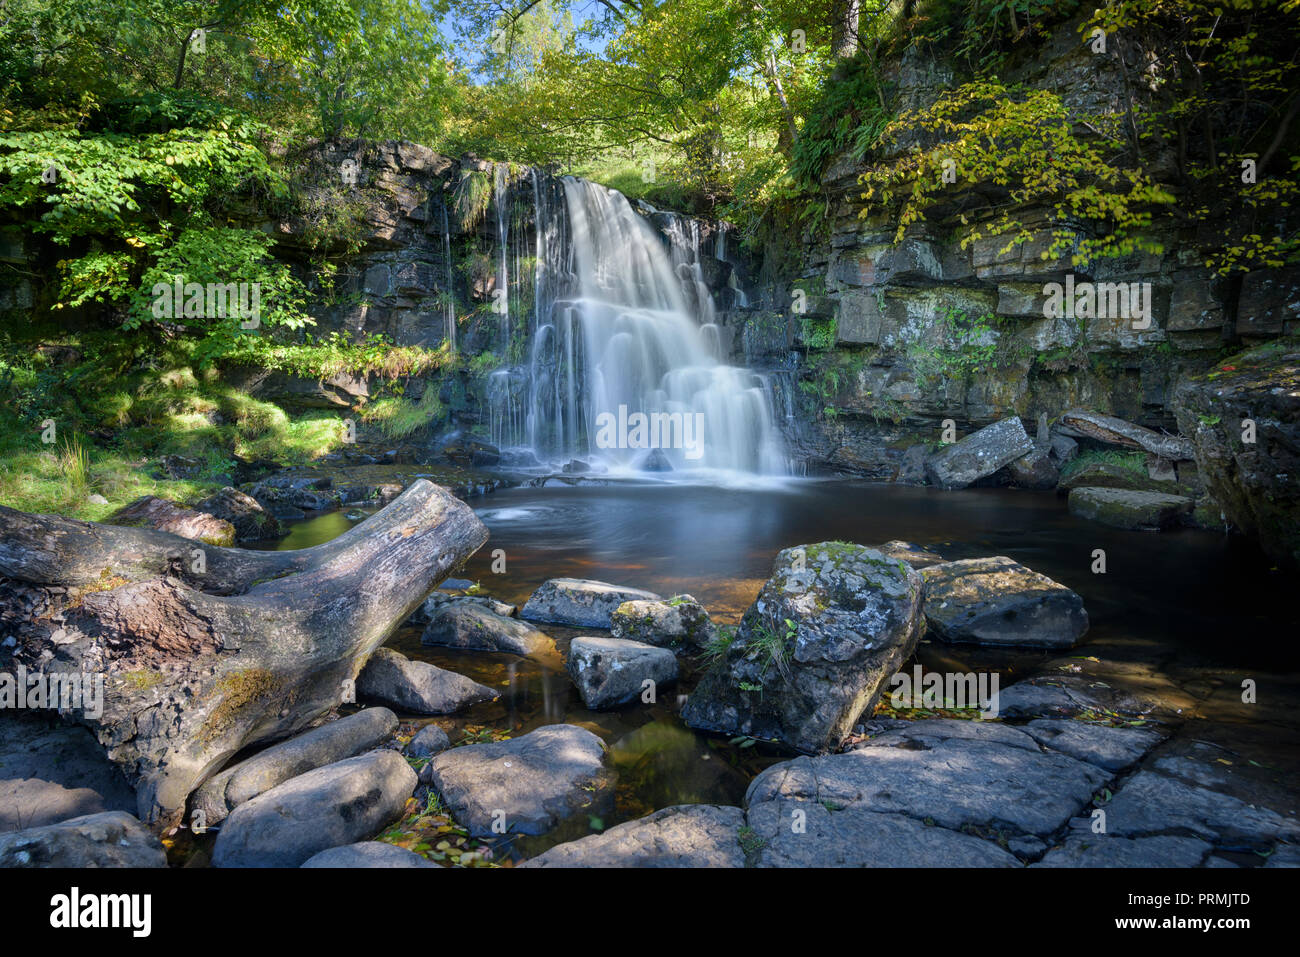 Tranquil, peaceful secluded natural scene romantic location Stock Photo